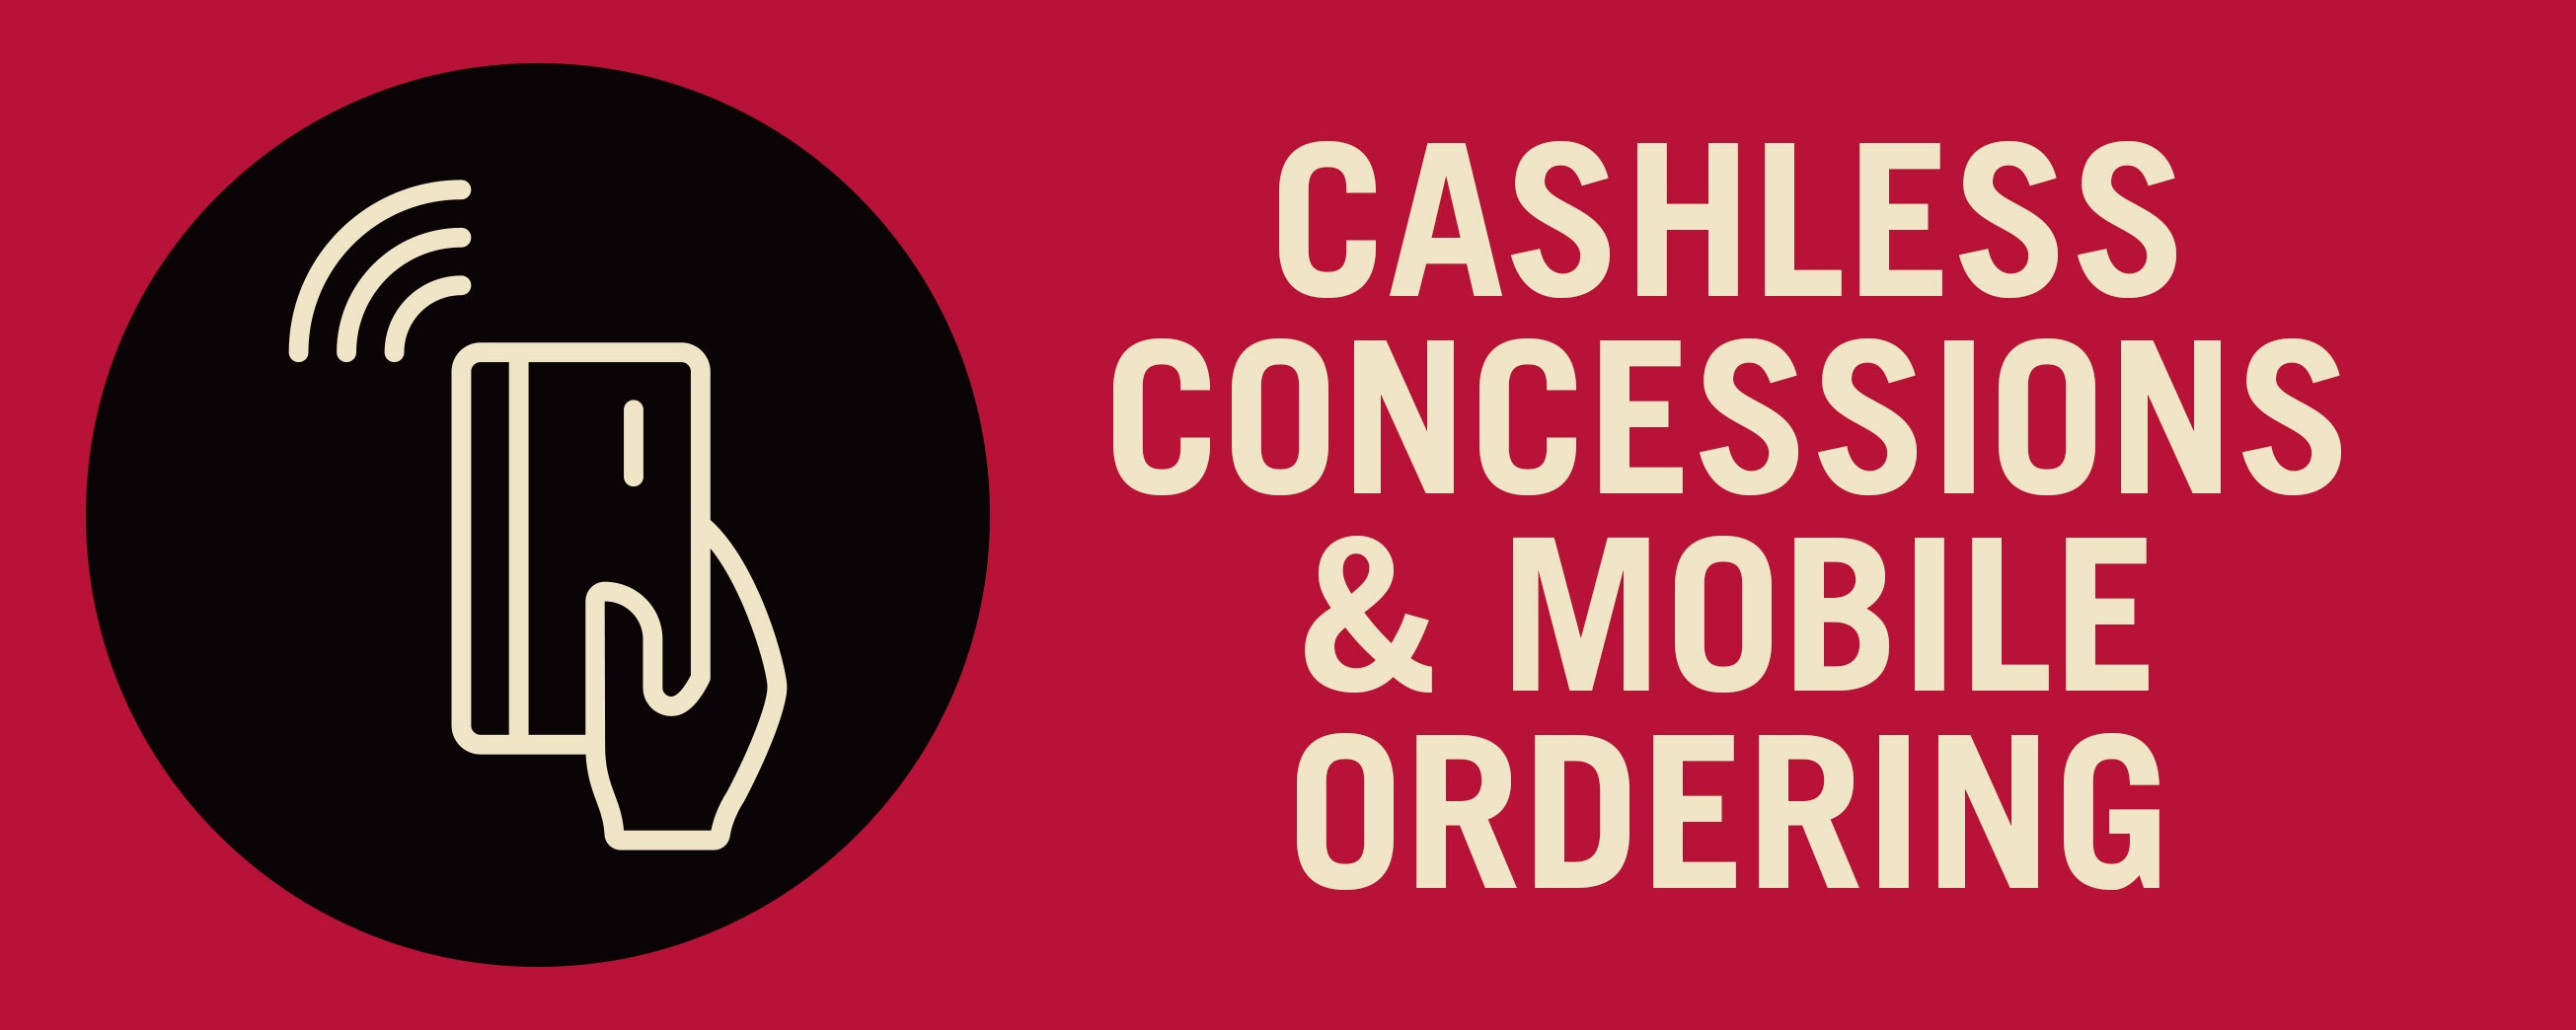 Cashless Concessions and Mobile Ordering